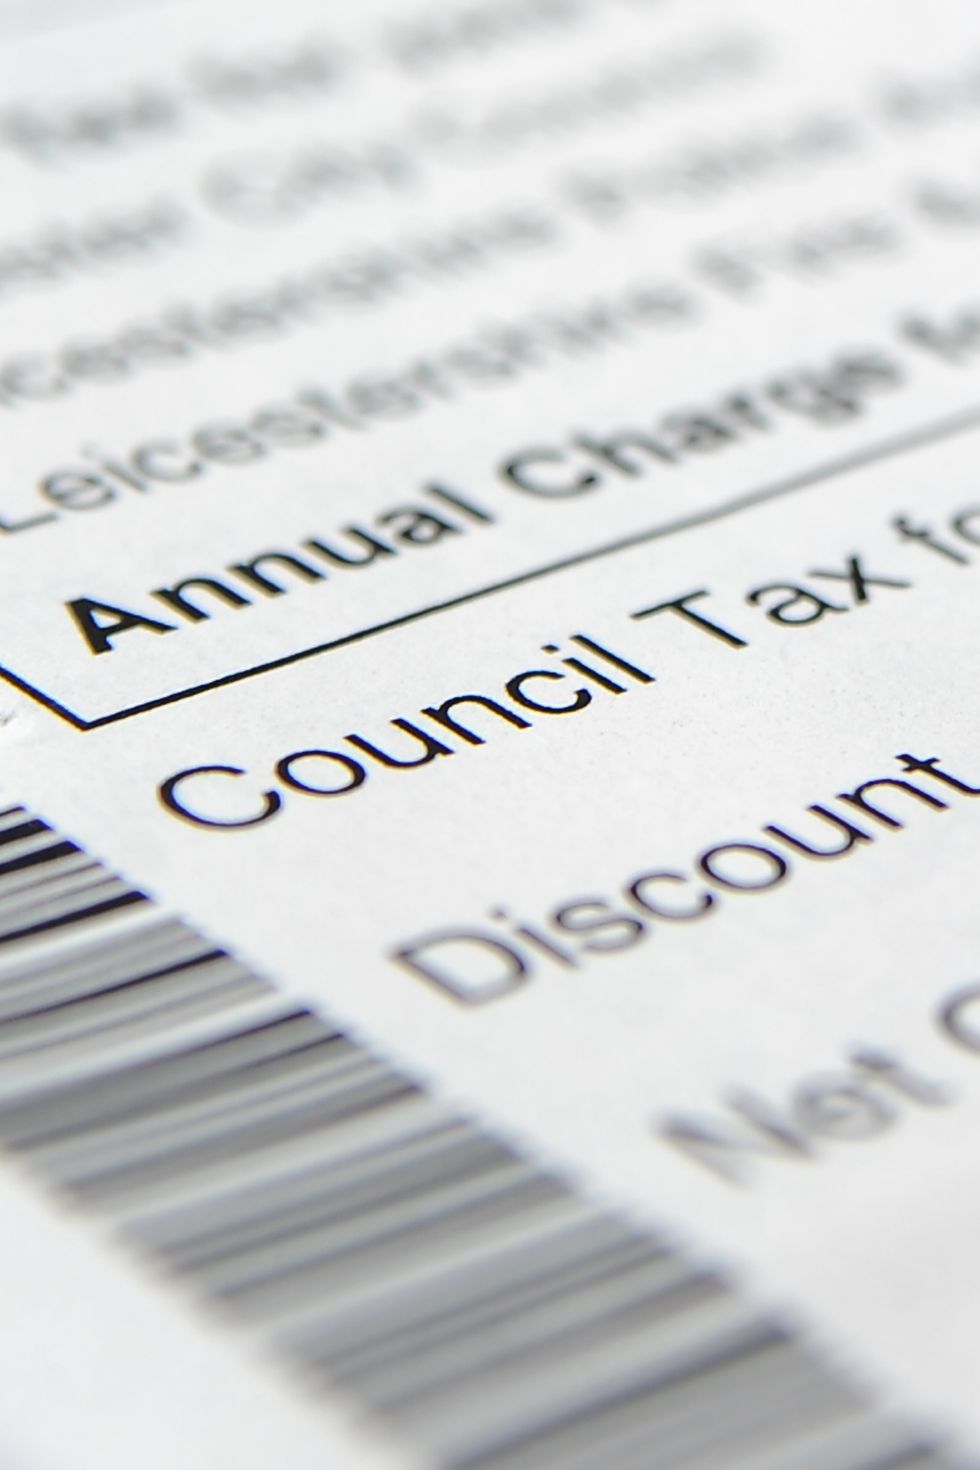 Council tax bill in pictures